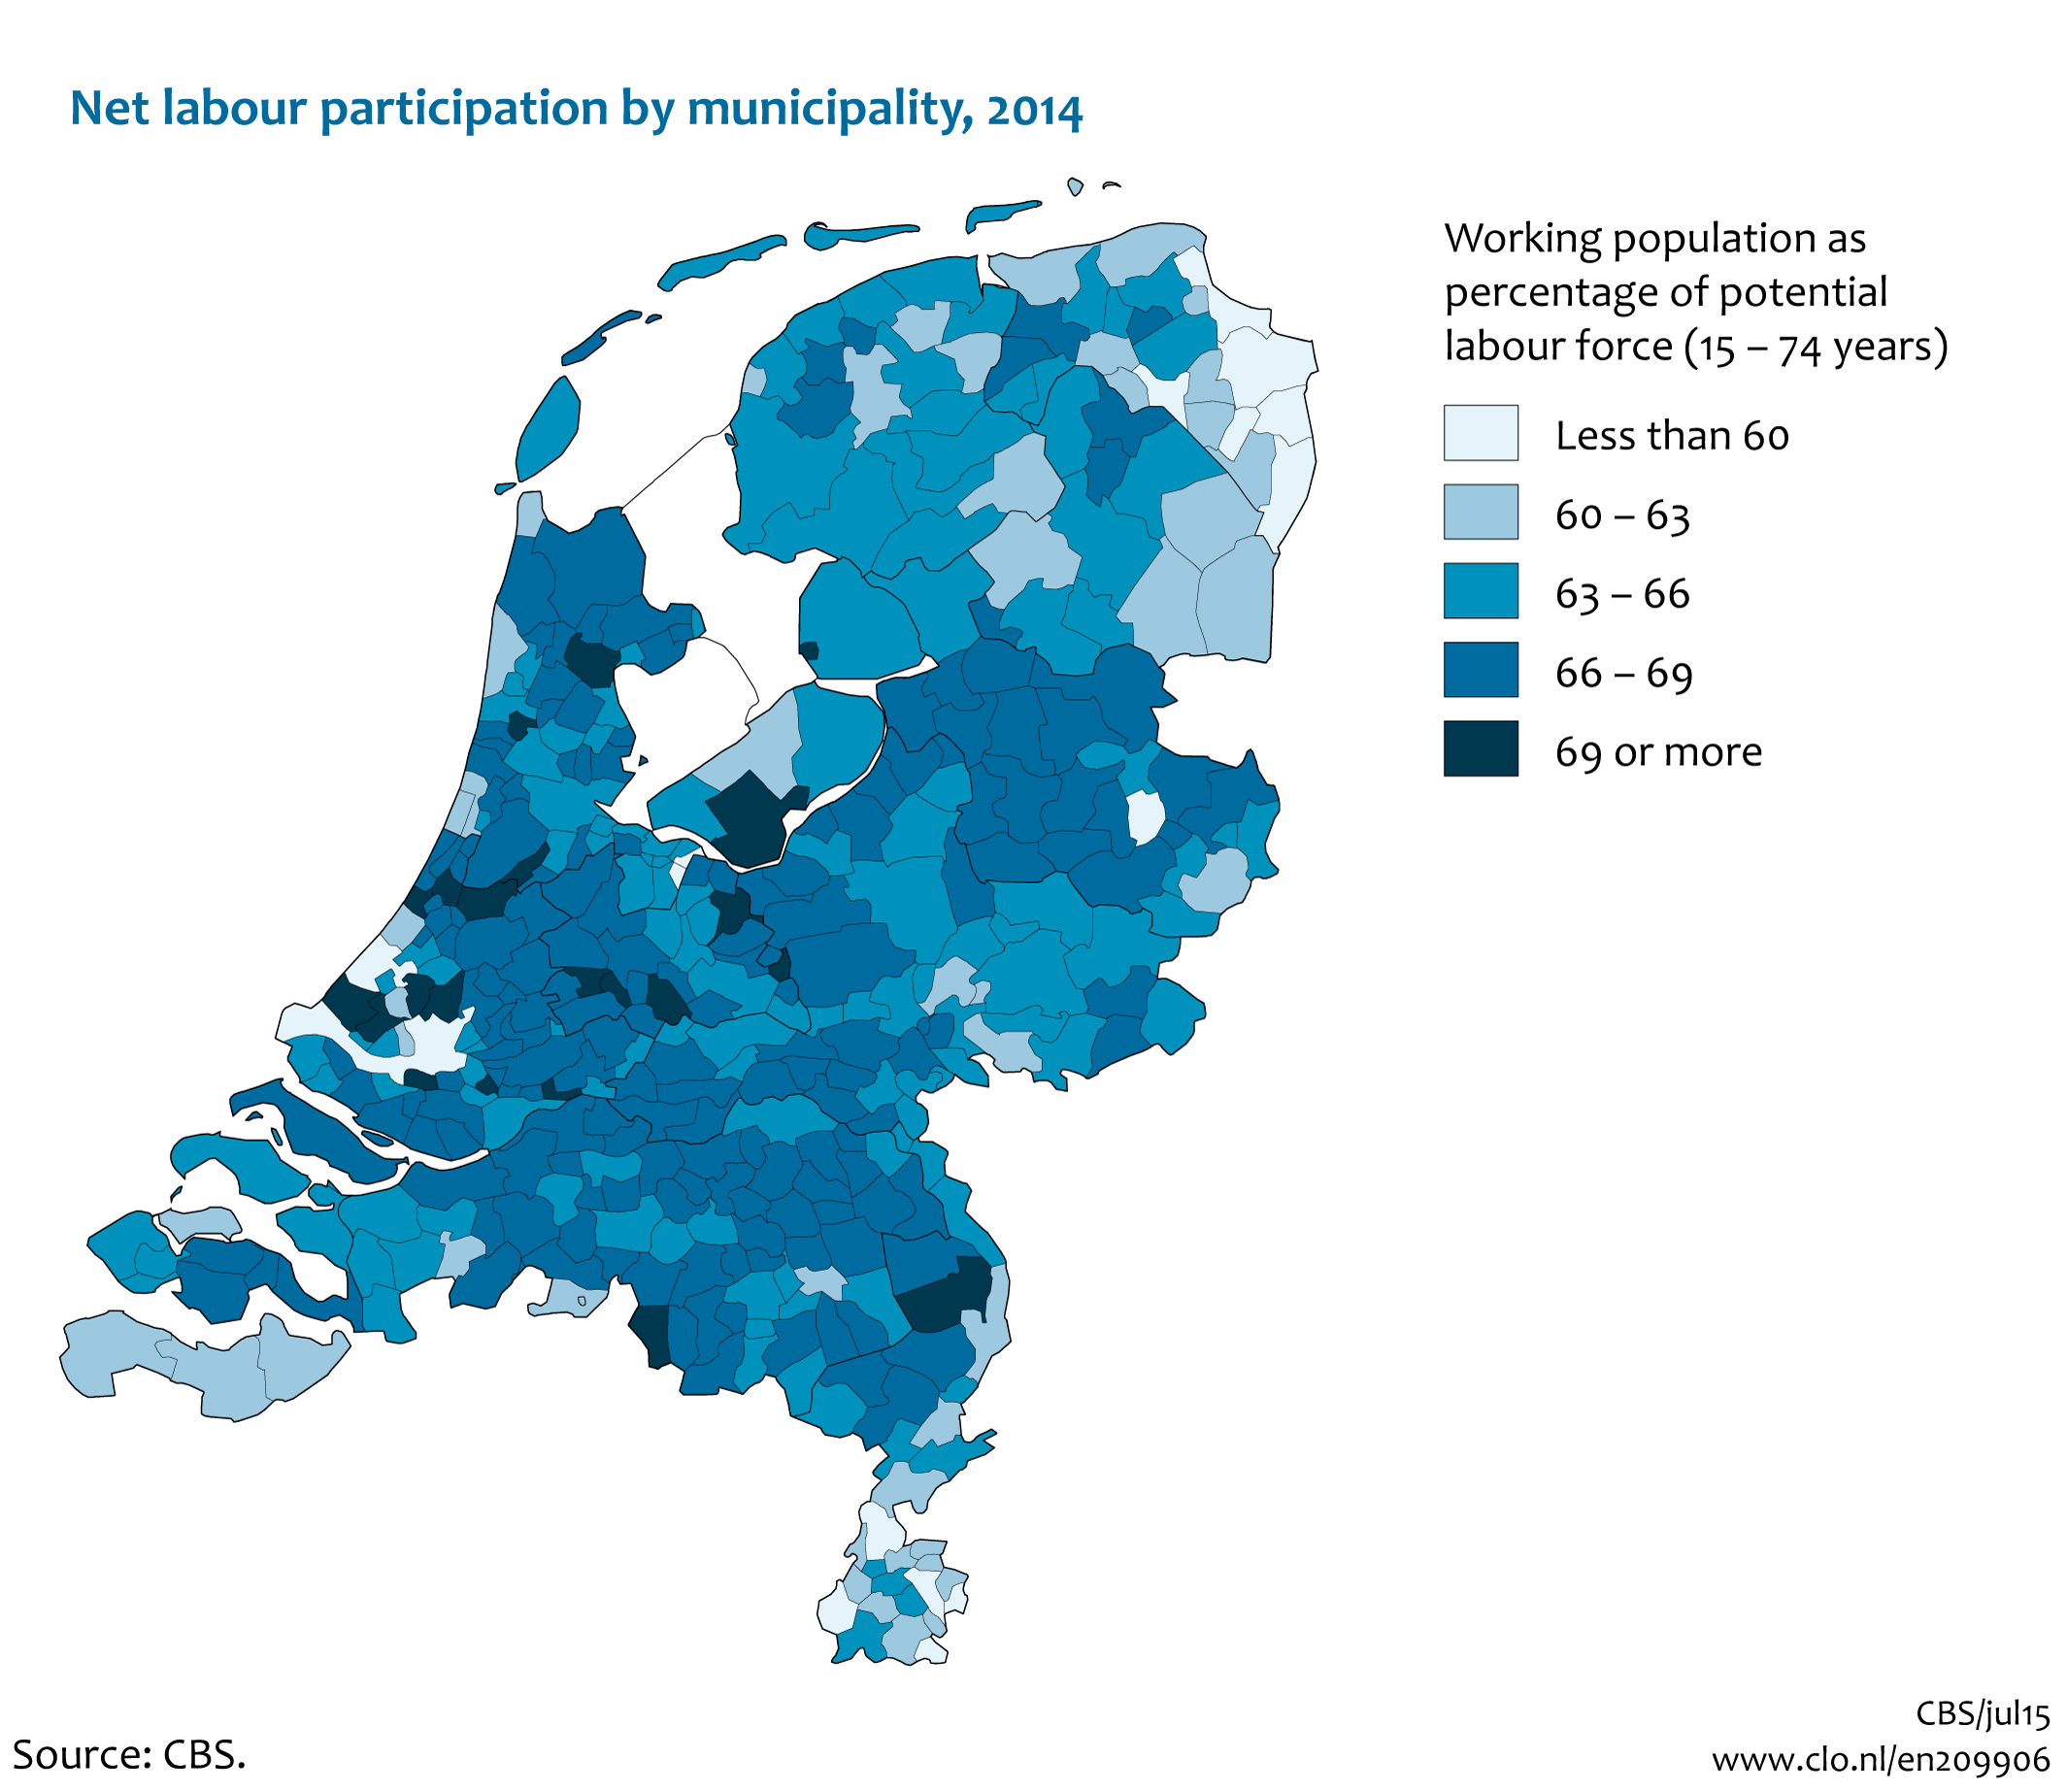 Image  Net labour participation by municipality. The image is further explained in the text.